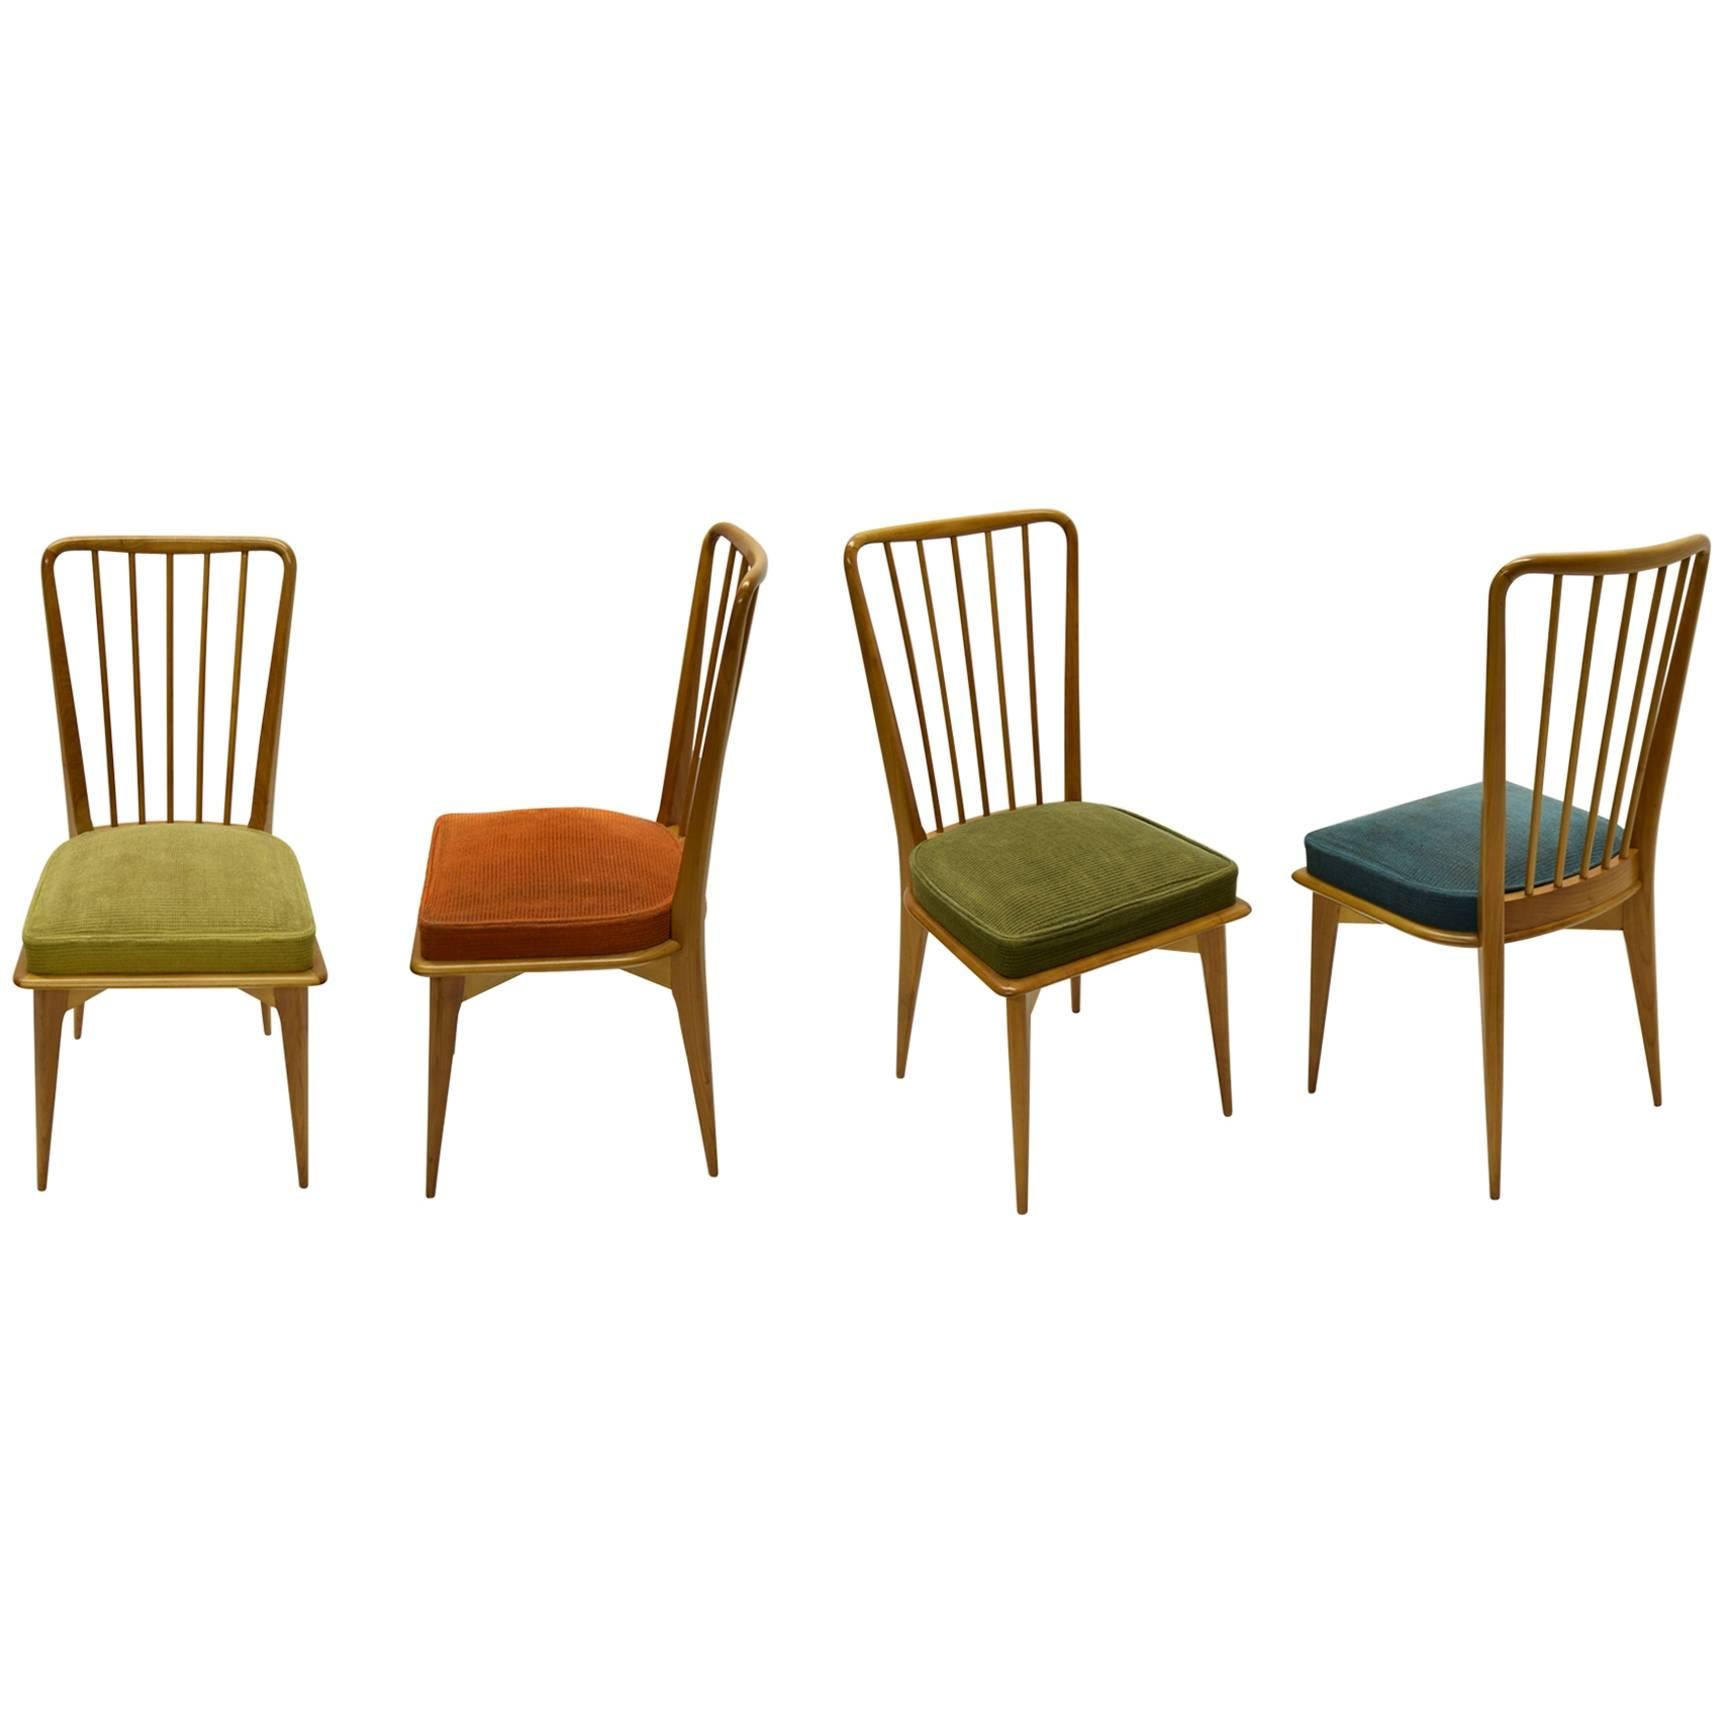 Four Chairs for Dining or Game Table Circa 1950 Denmark For Sale